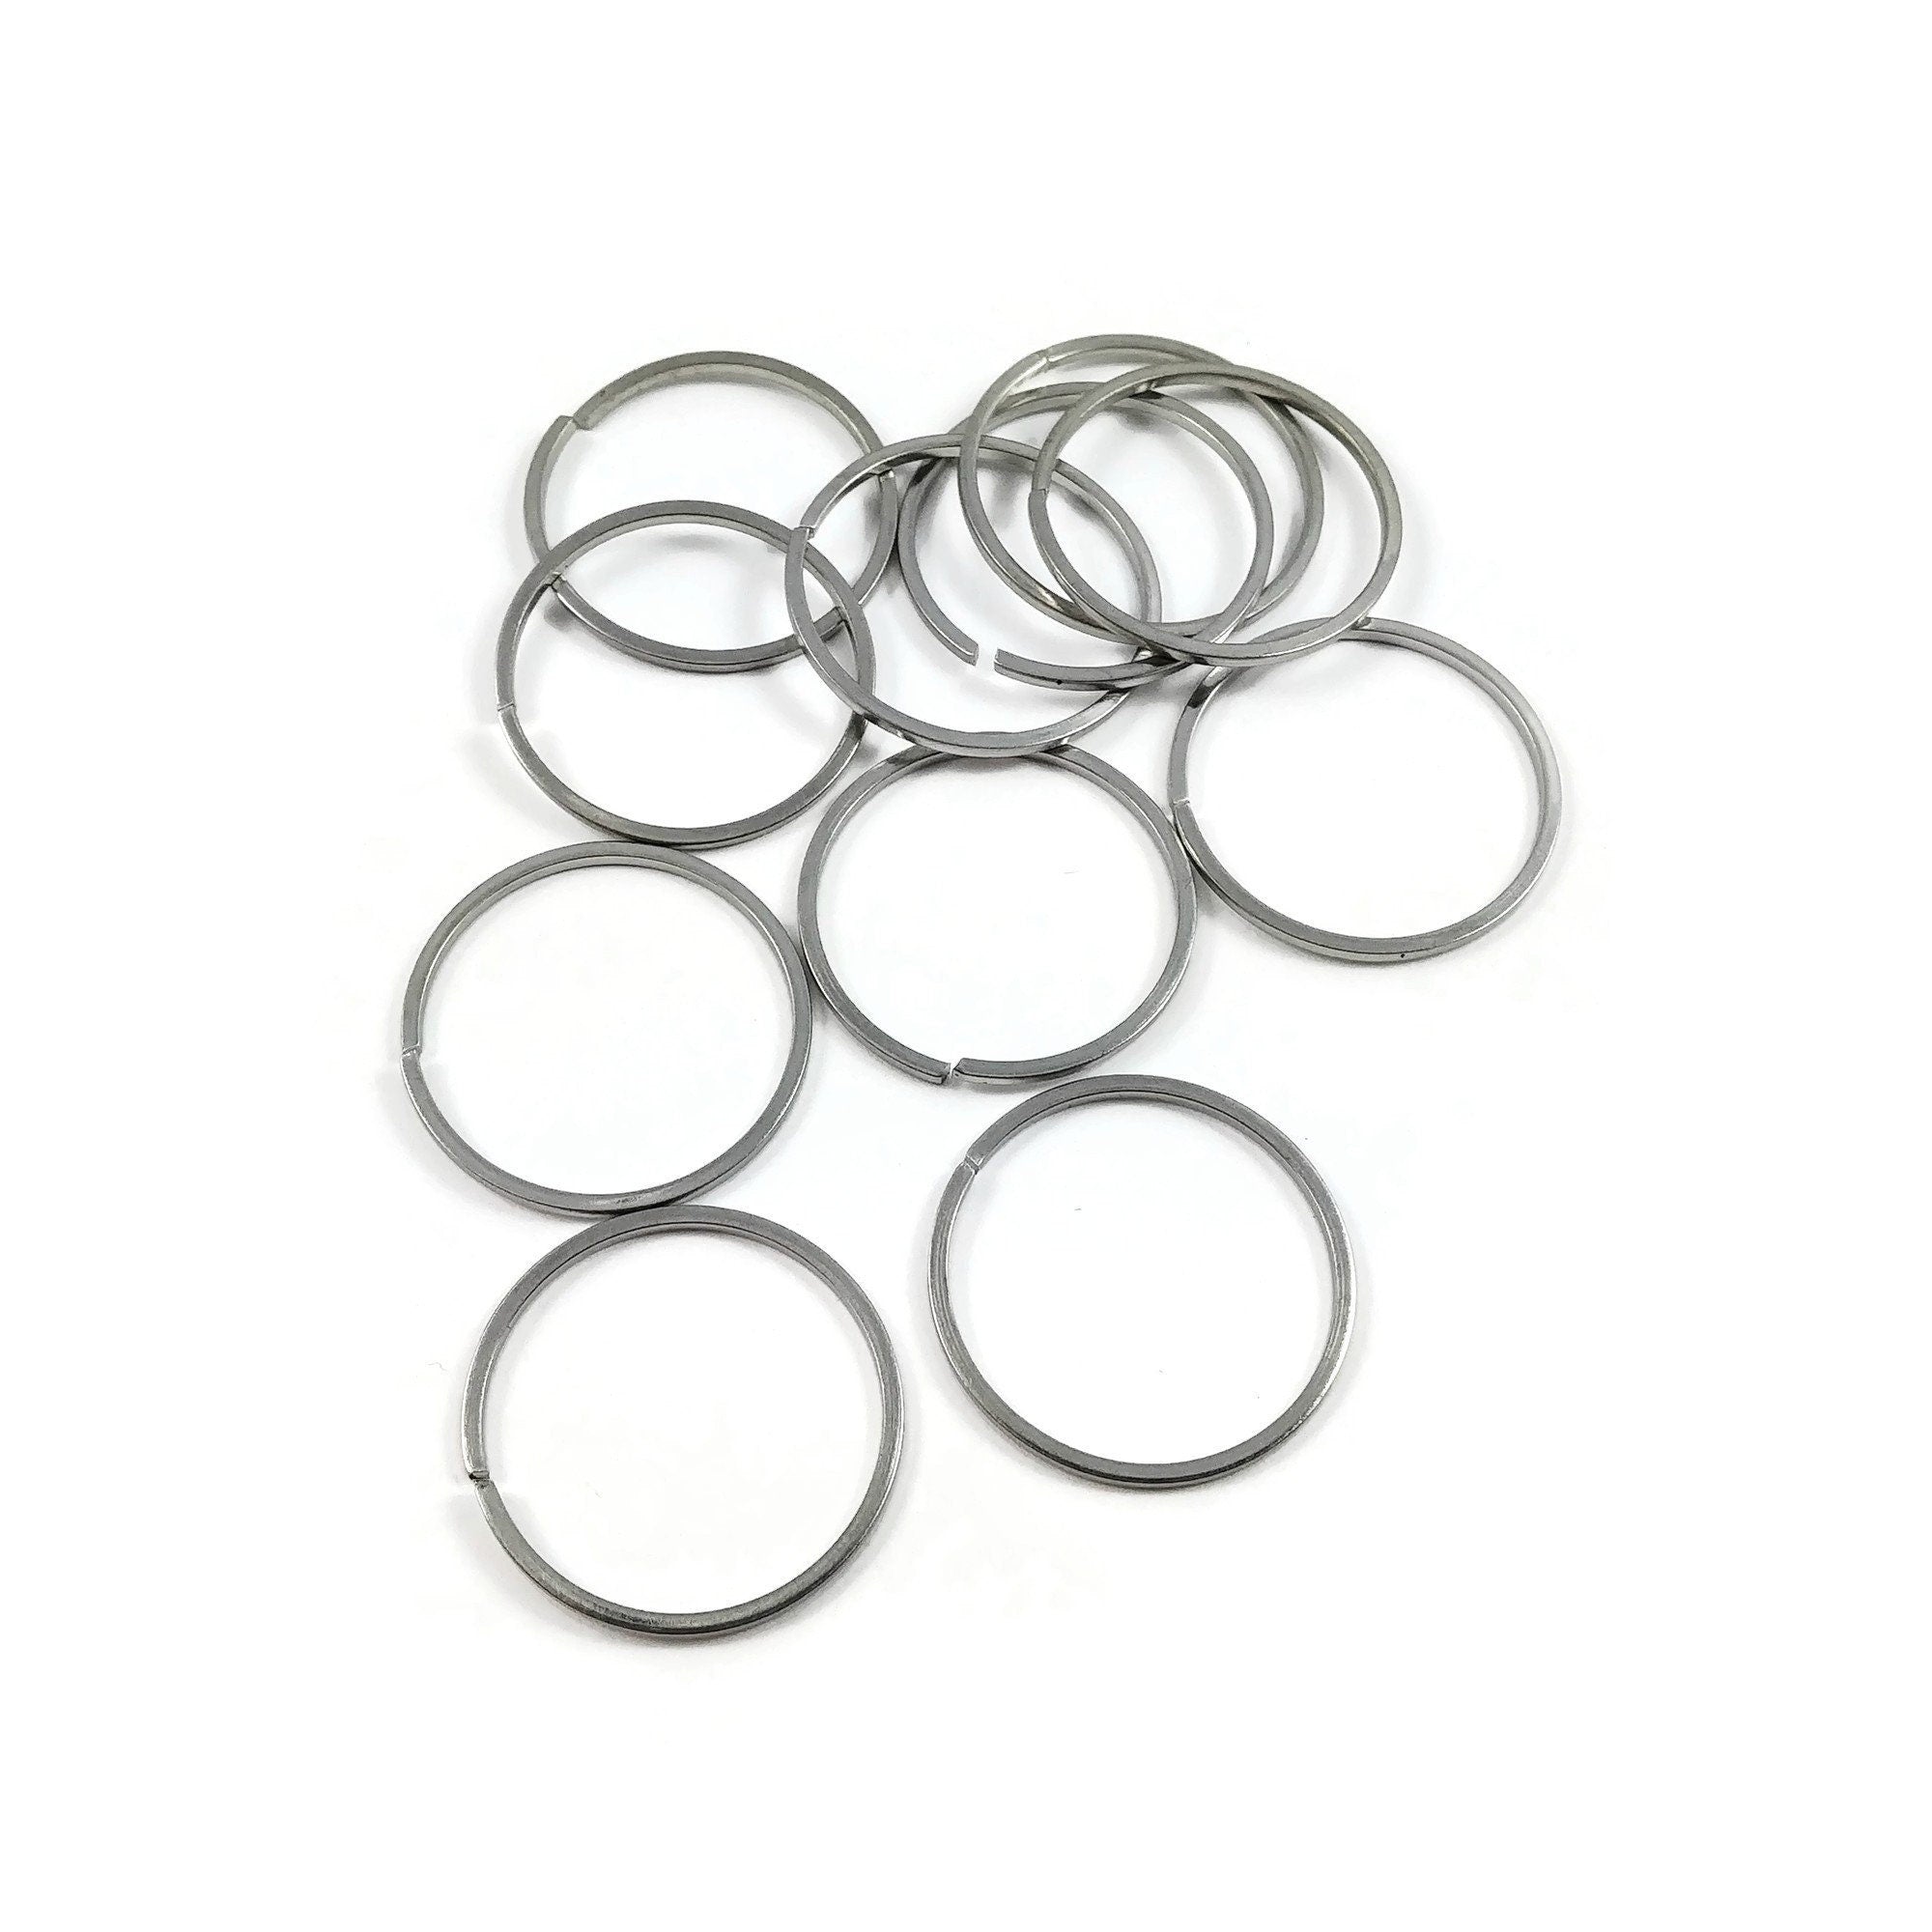 100-200pcs Stainless Steel Open Jump Rings Jewelry Making